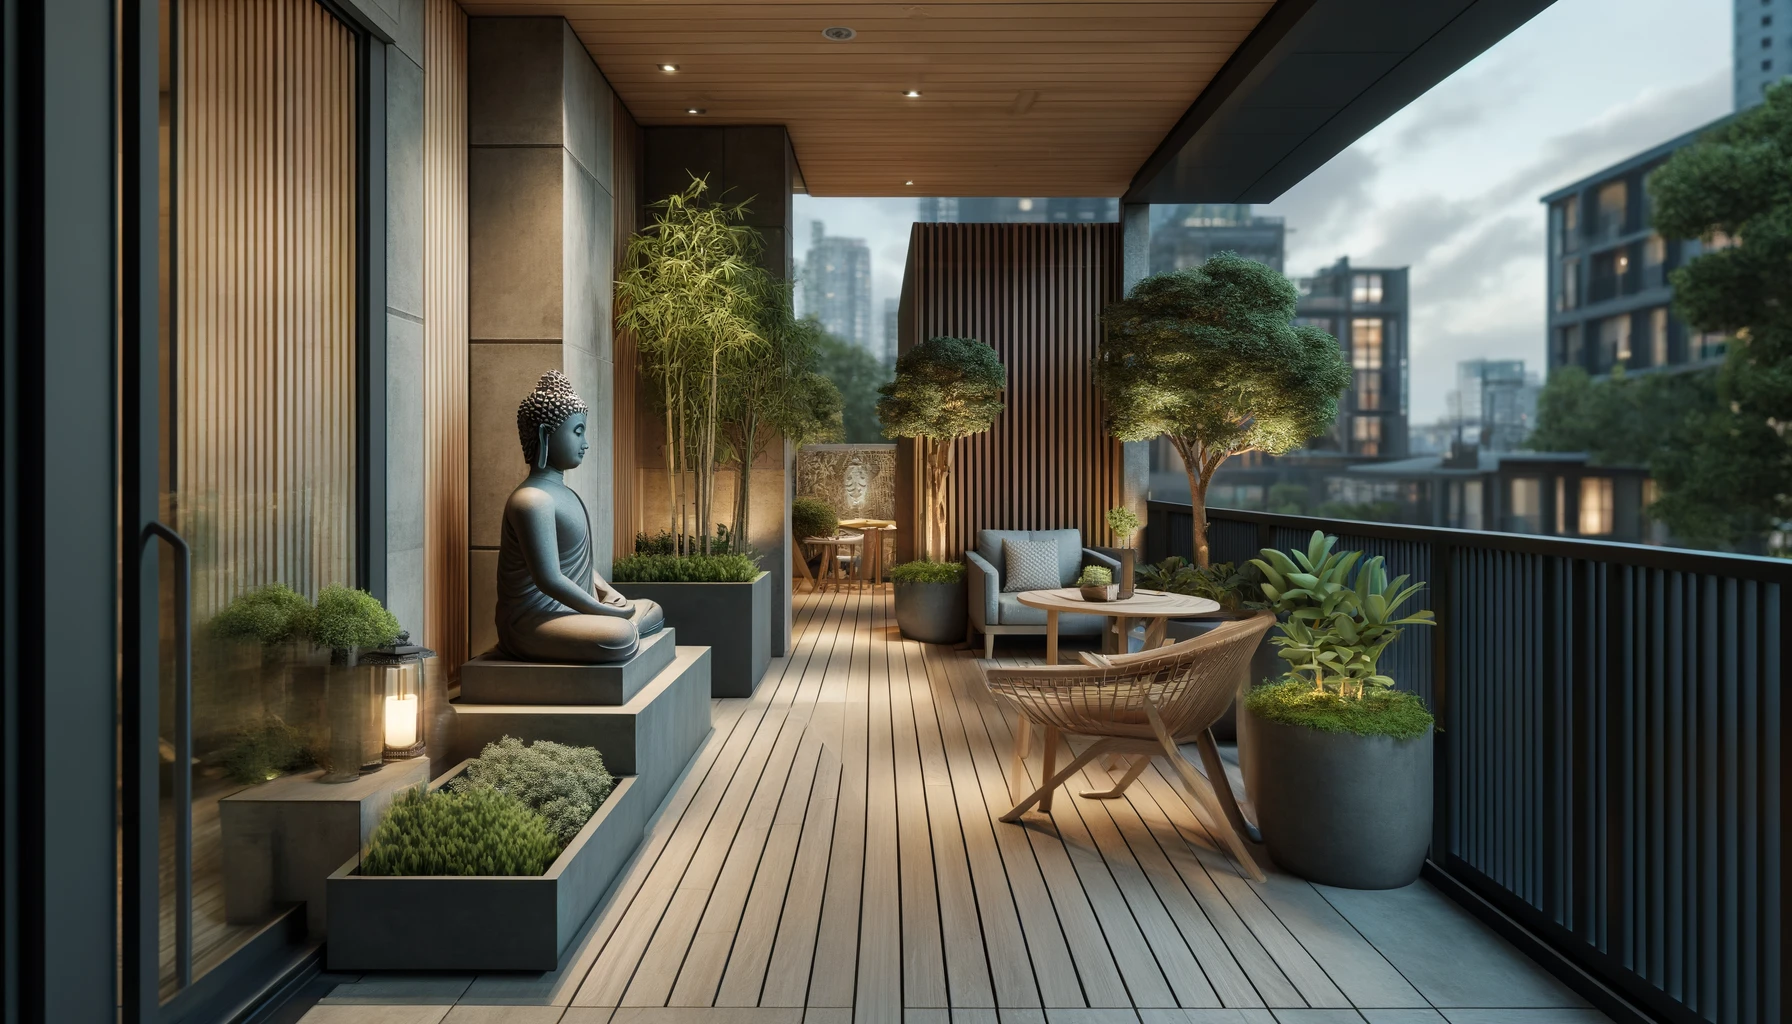 A modern urban balcony with natural wood and concrete textures, featuring a smaller, more subtle slate gray Buddha statue in the center. This balcony is adorned with contemporary planters filled with lush greenery such as bamboo and small trees, creating a serene atmosphere. The setting includes stylish outdoor furniture like a minimalist bench and chairs with soft cushions. Ambient lighting and a small water feature complement the tranquil urban environment, with a city skyline in the background.